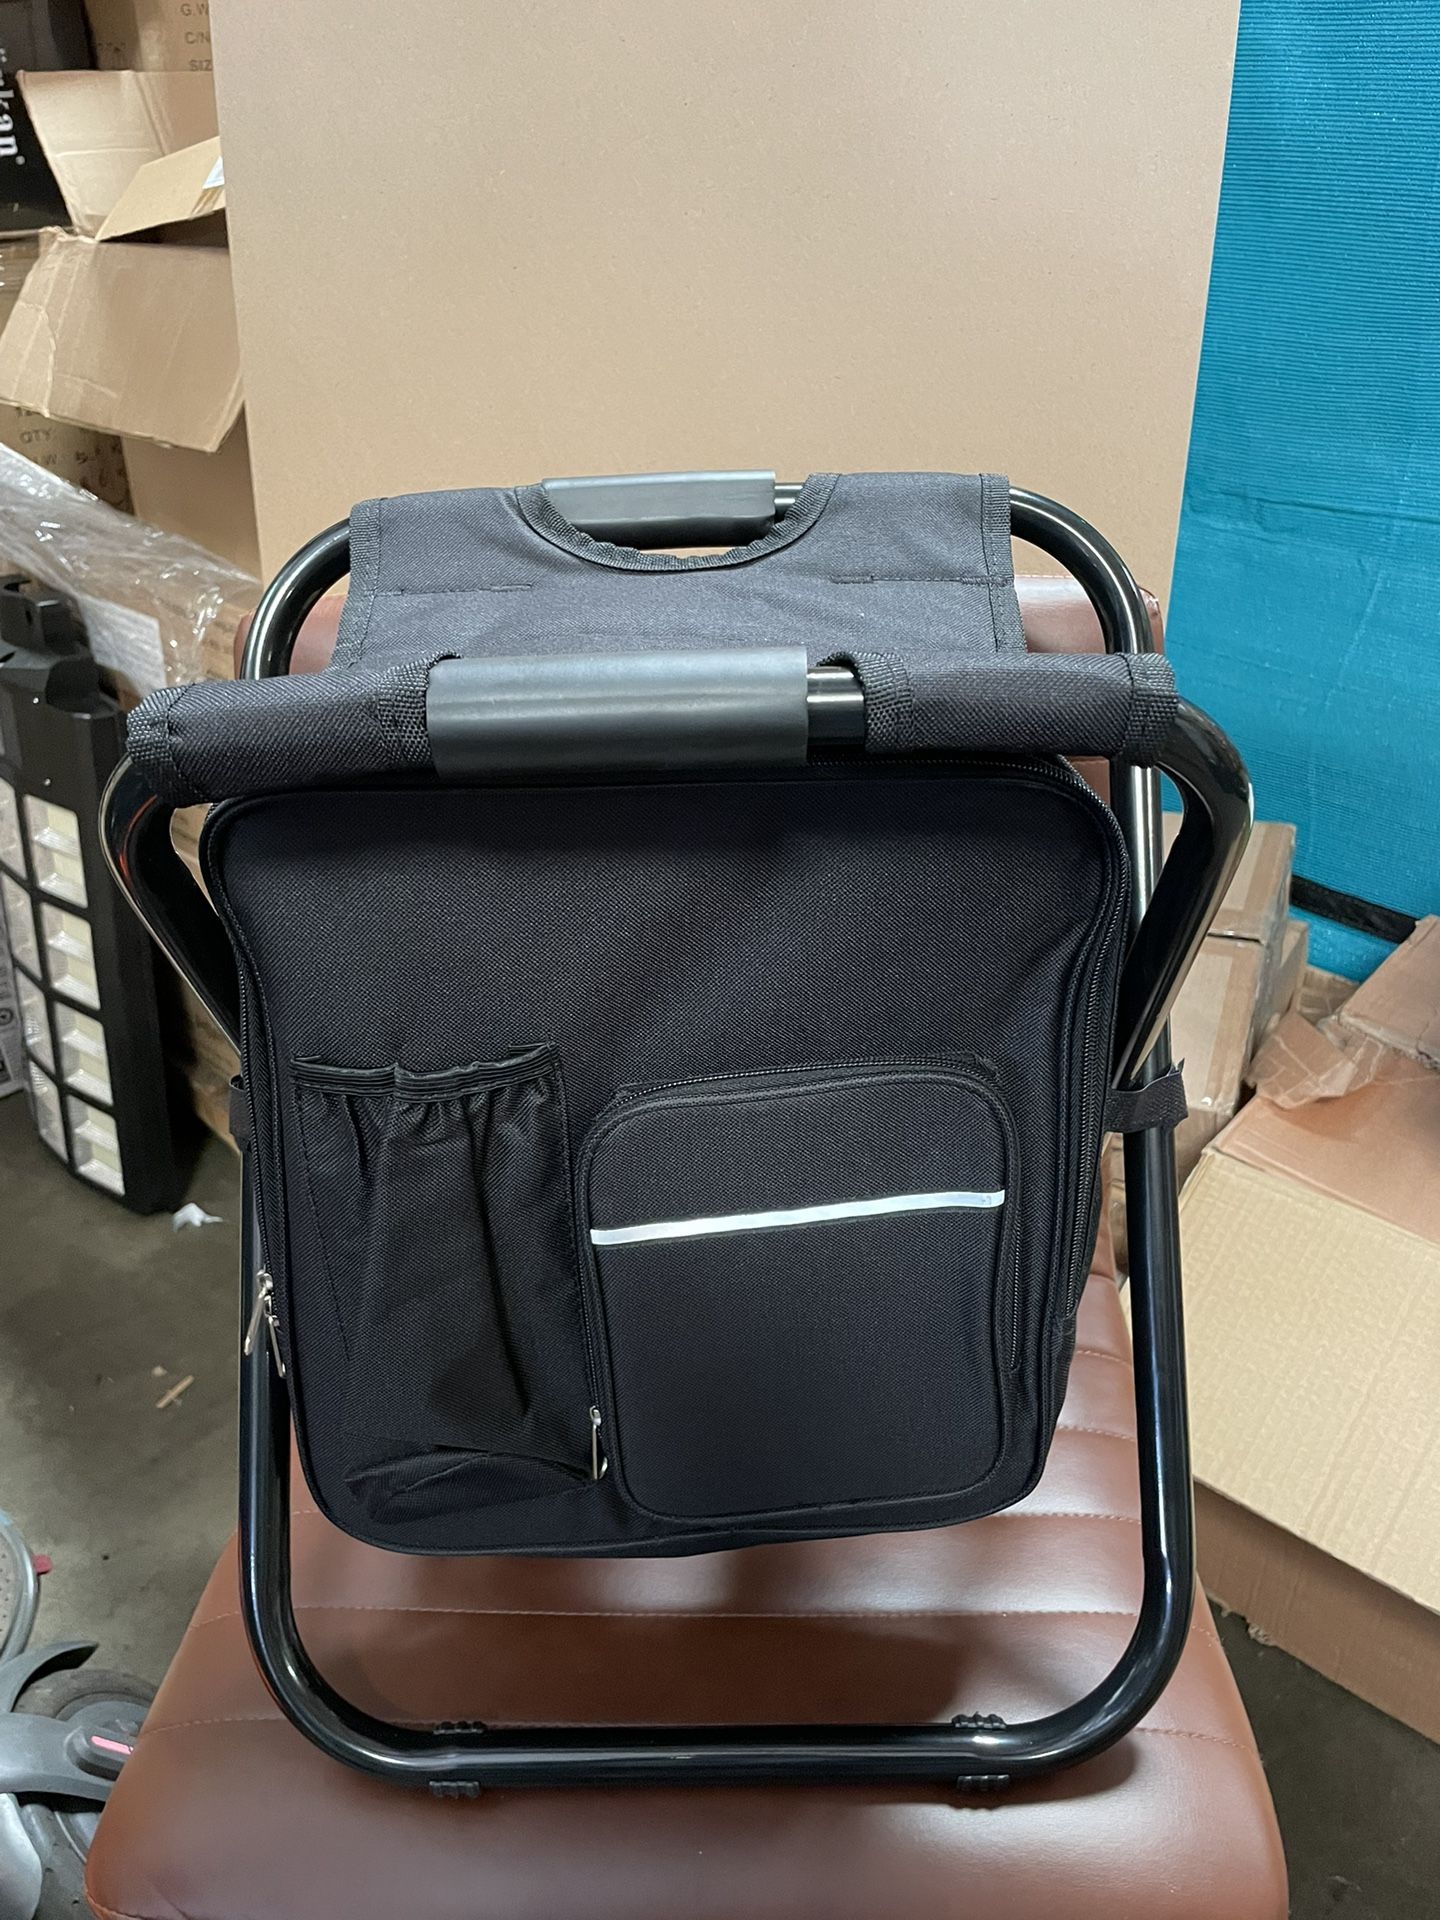 Insulated Backpack Cooler with Folding Stool Chair